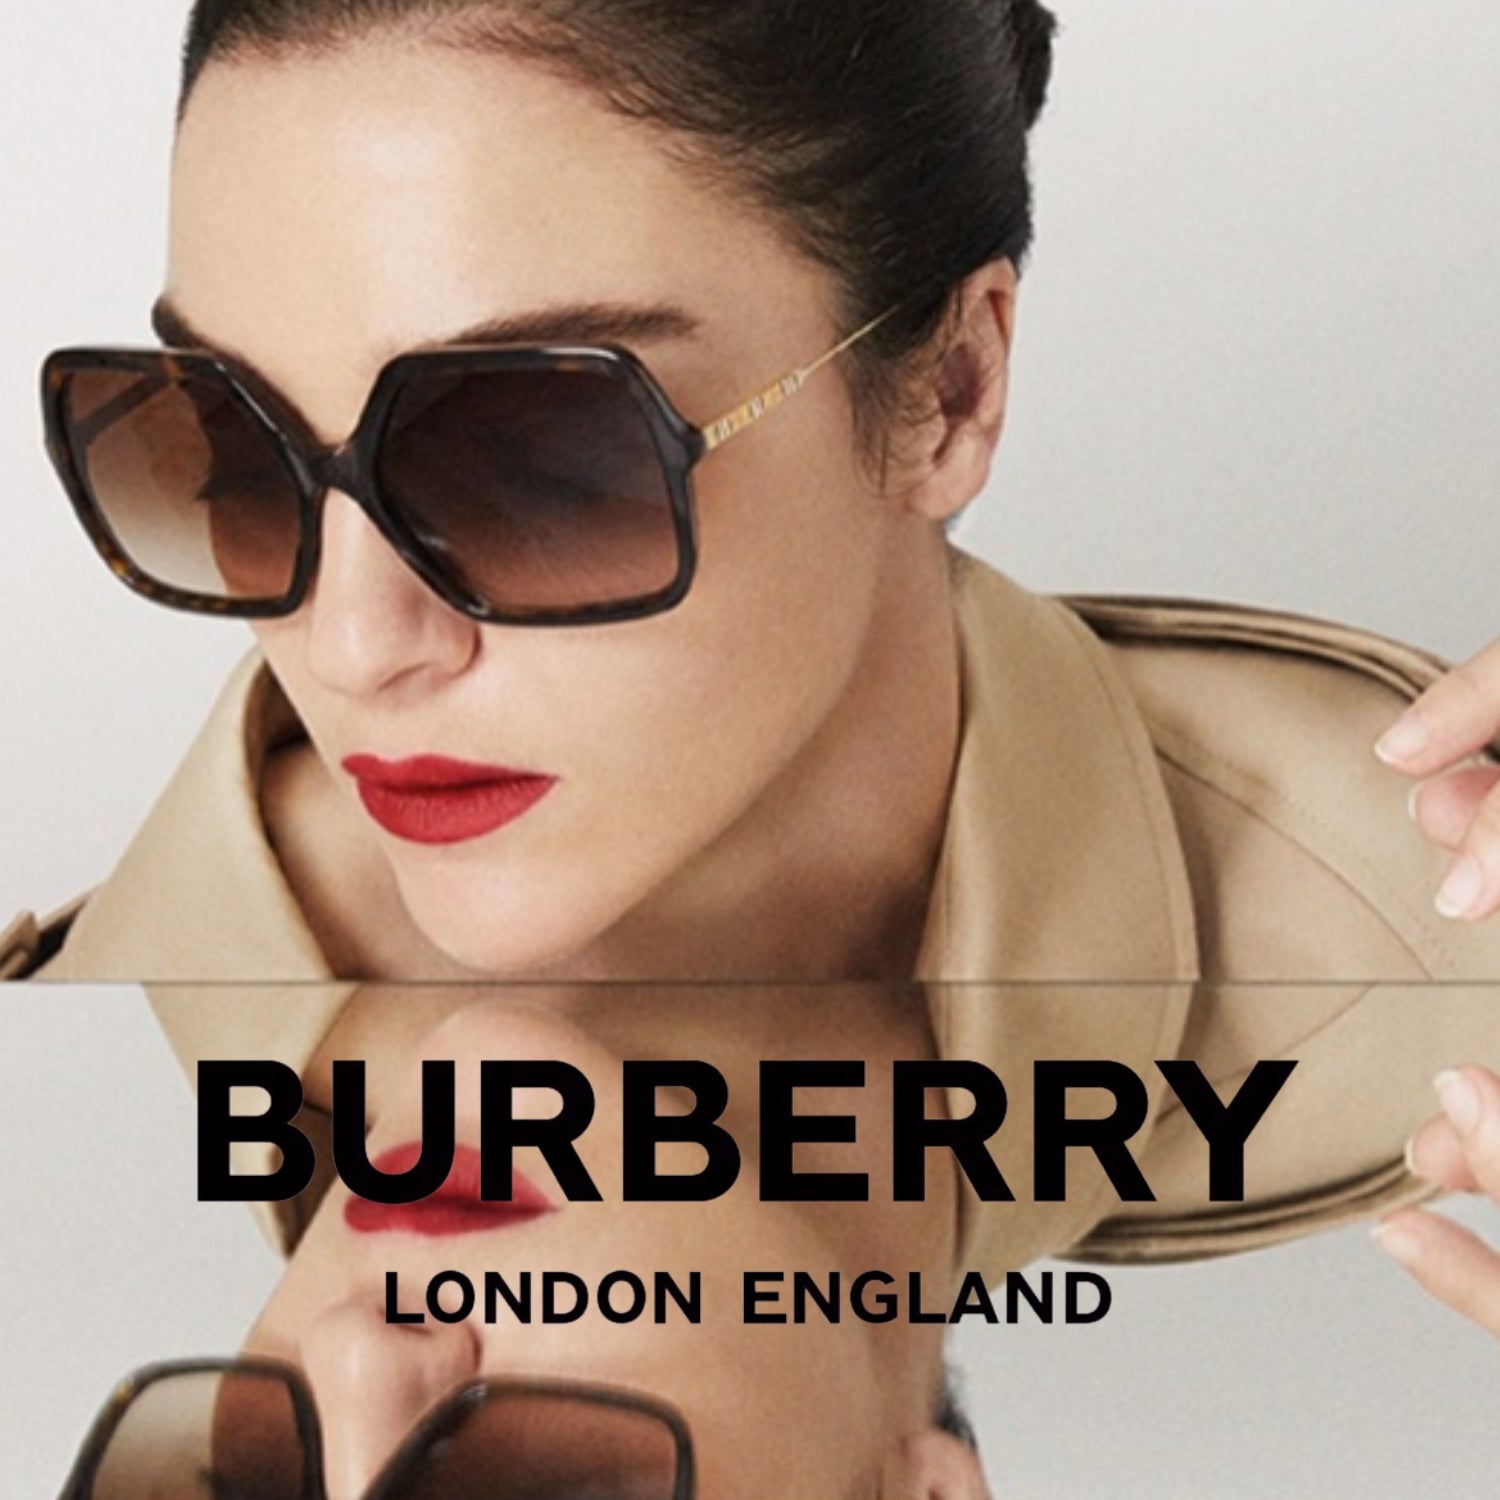 "Burberry Eyewear - Sunglasses & Spectacles For Both Mens & Womens"  